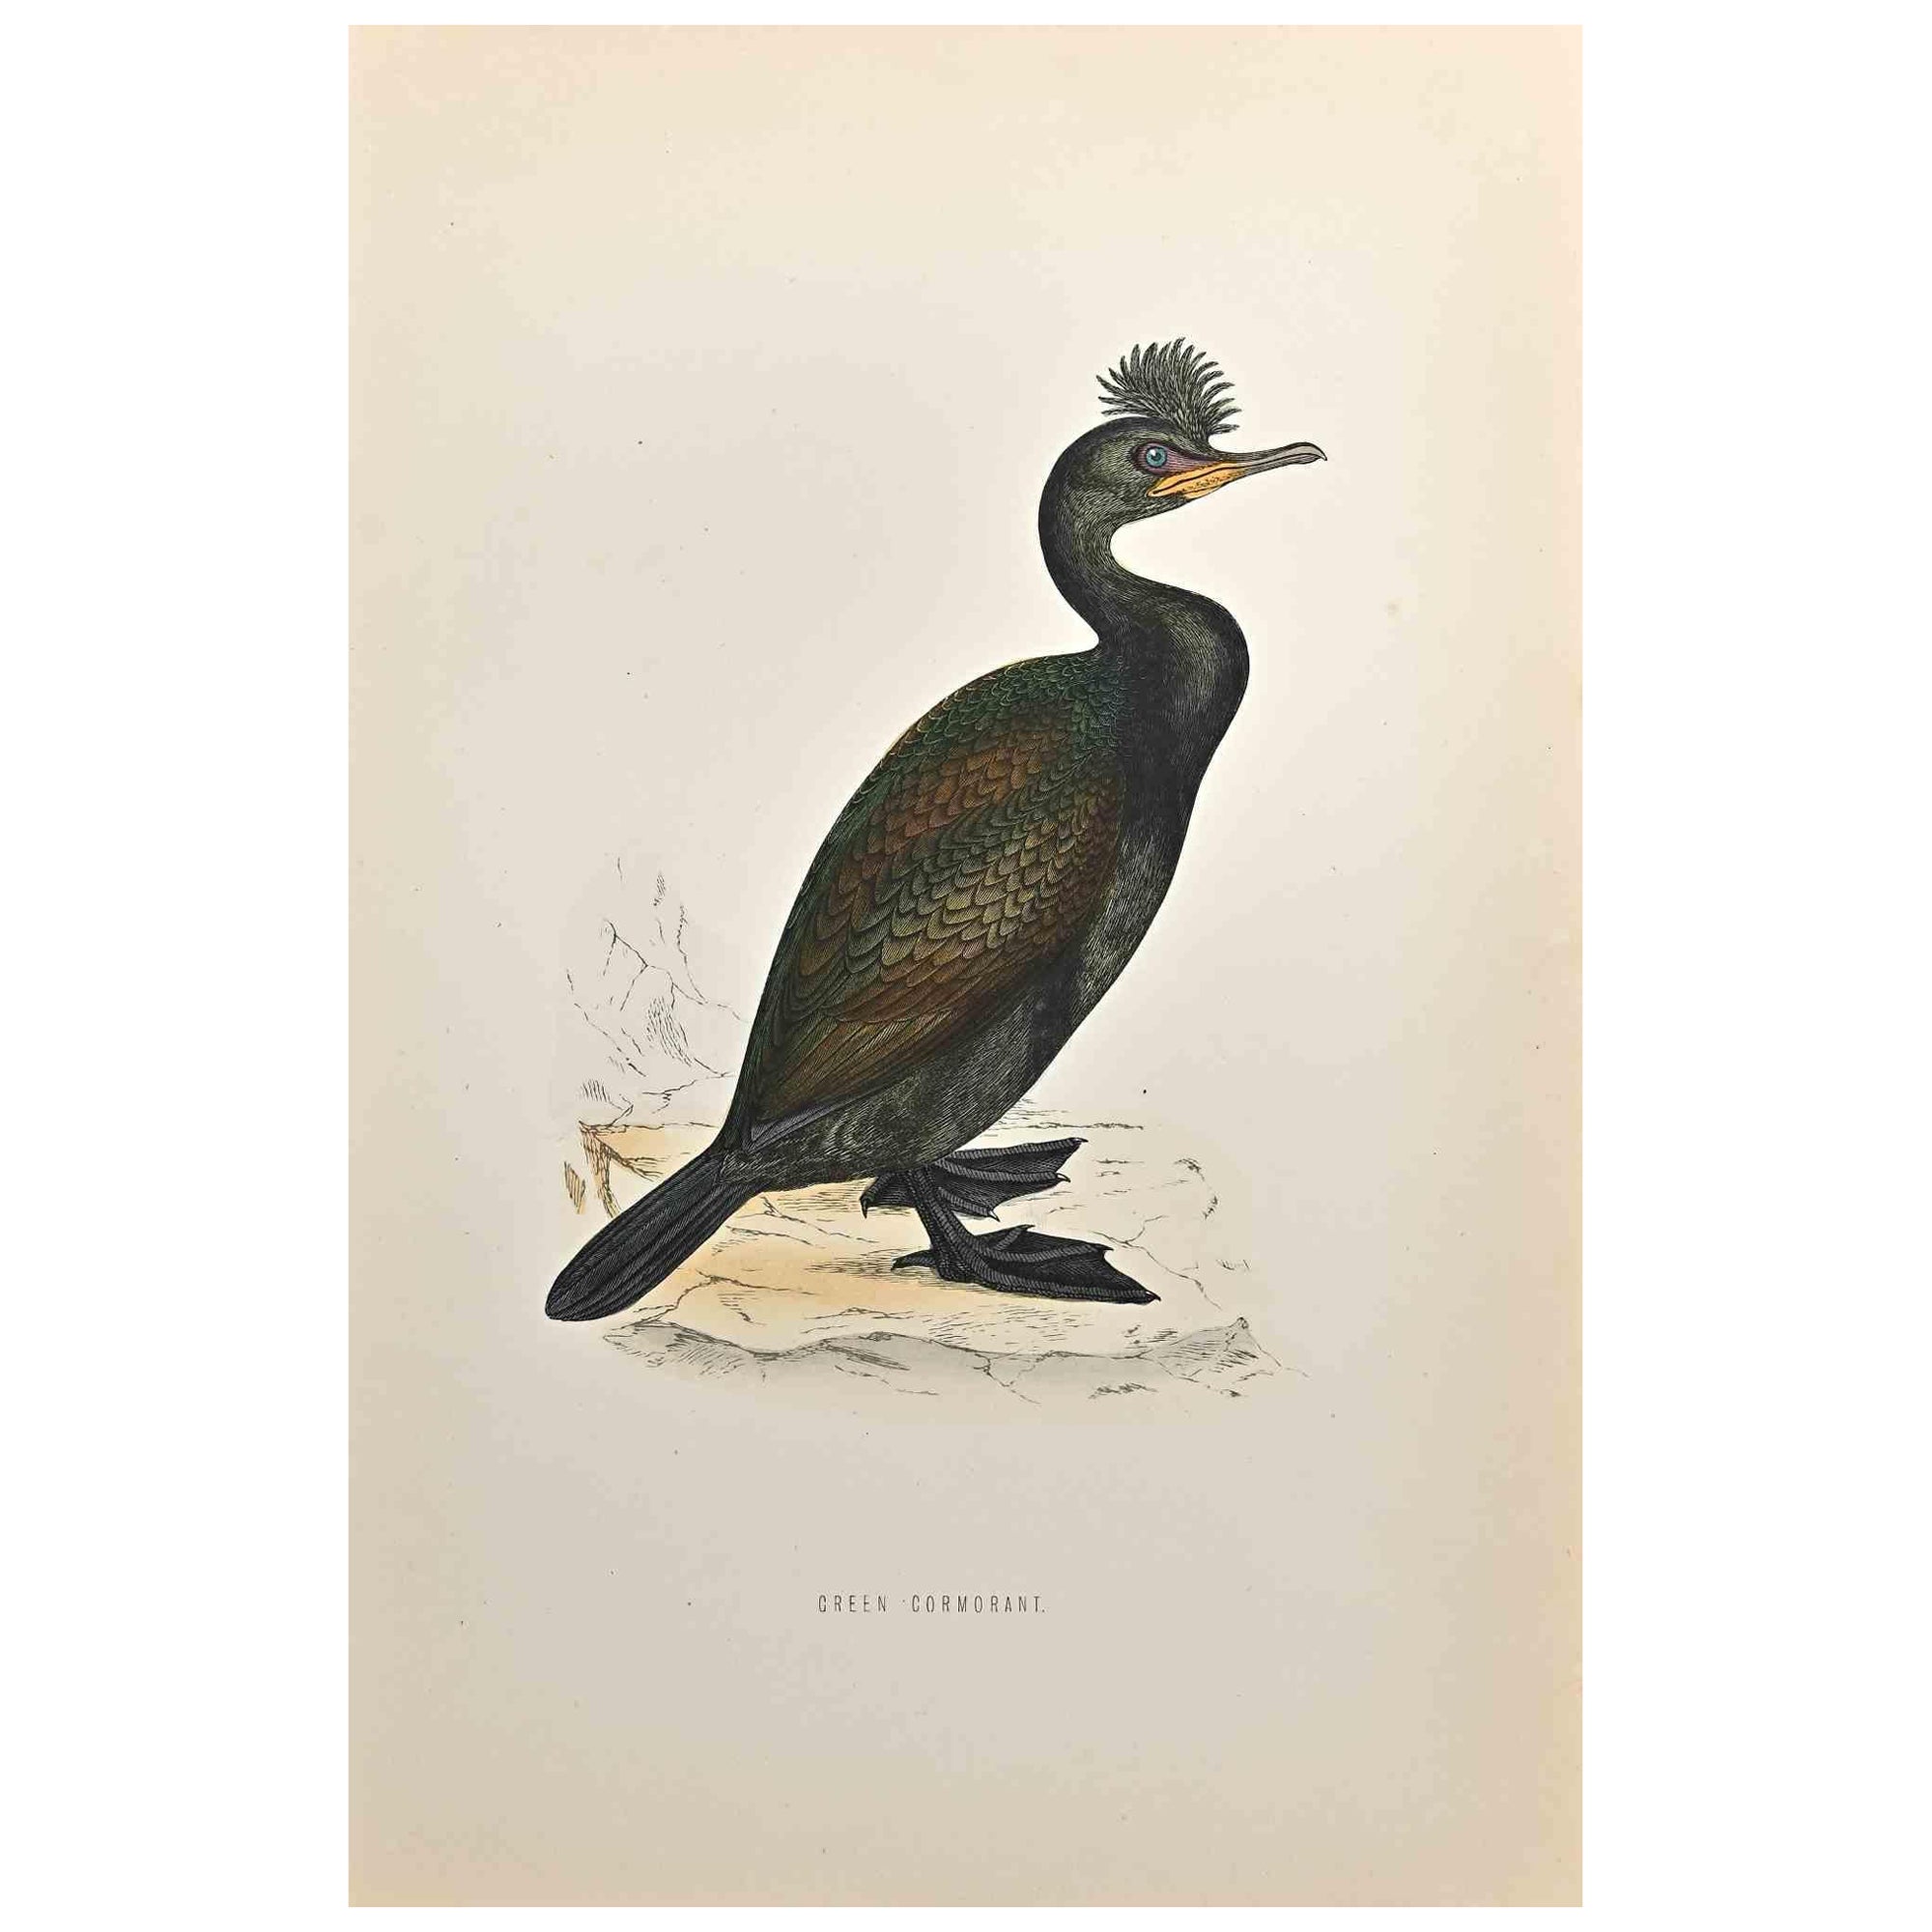 Green Cormorant is a modern artwork realized in 1870 by the British artist Alexander Francis Lydon (1836-1917) . 

Woodcut print, hand colored, published by London, Bell & Sons, 1870.  Name of the bird printed in plate. This work is part of a print